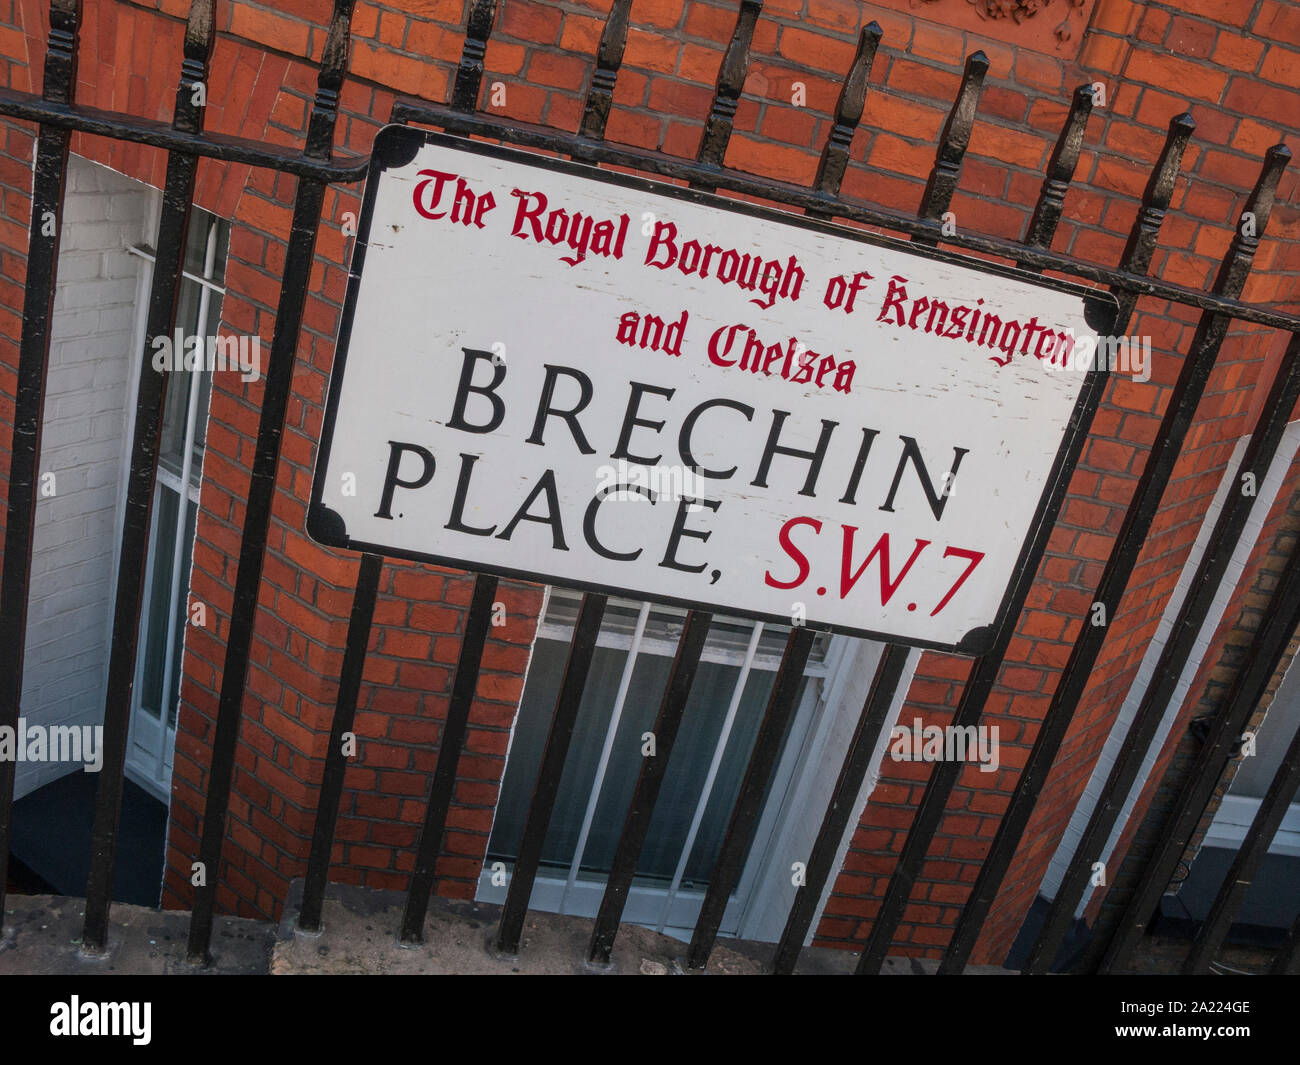 Brechin Place, SW7 street sign, London Stock Photo